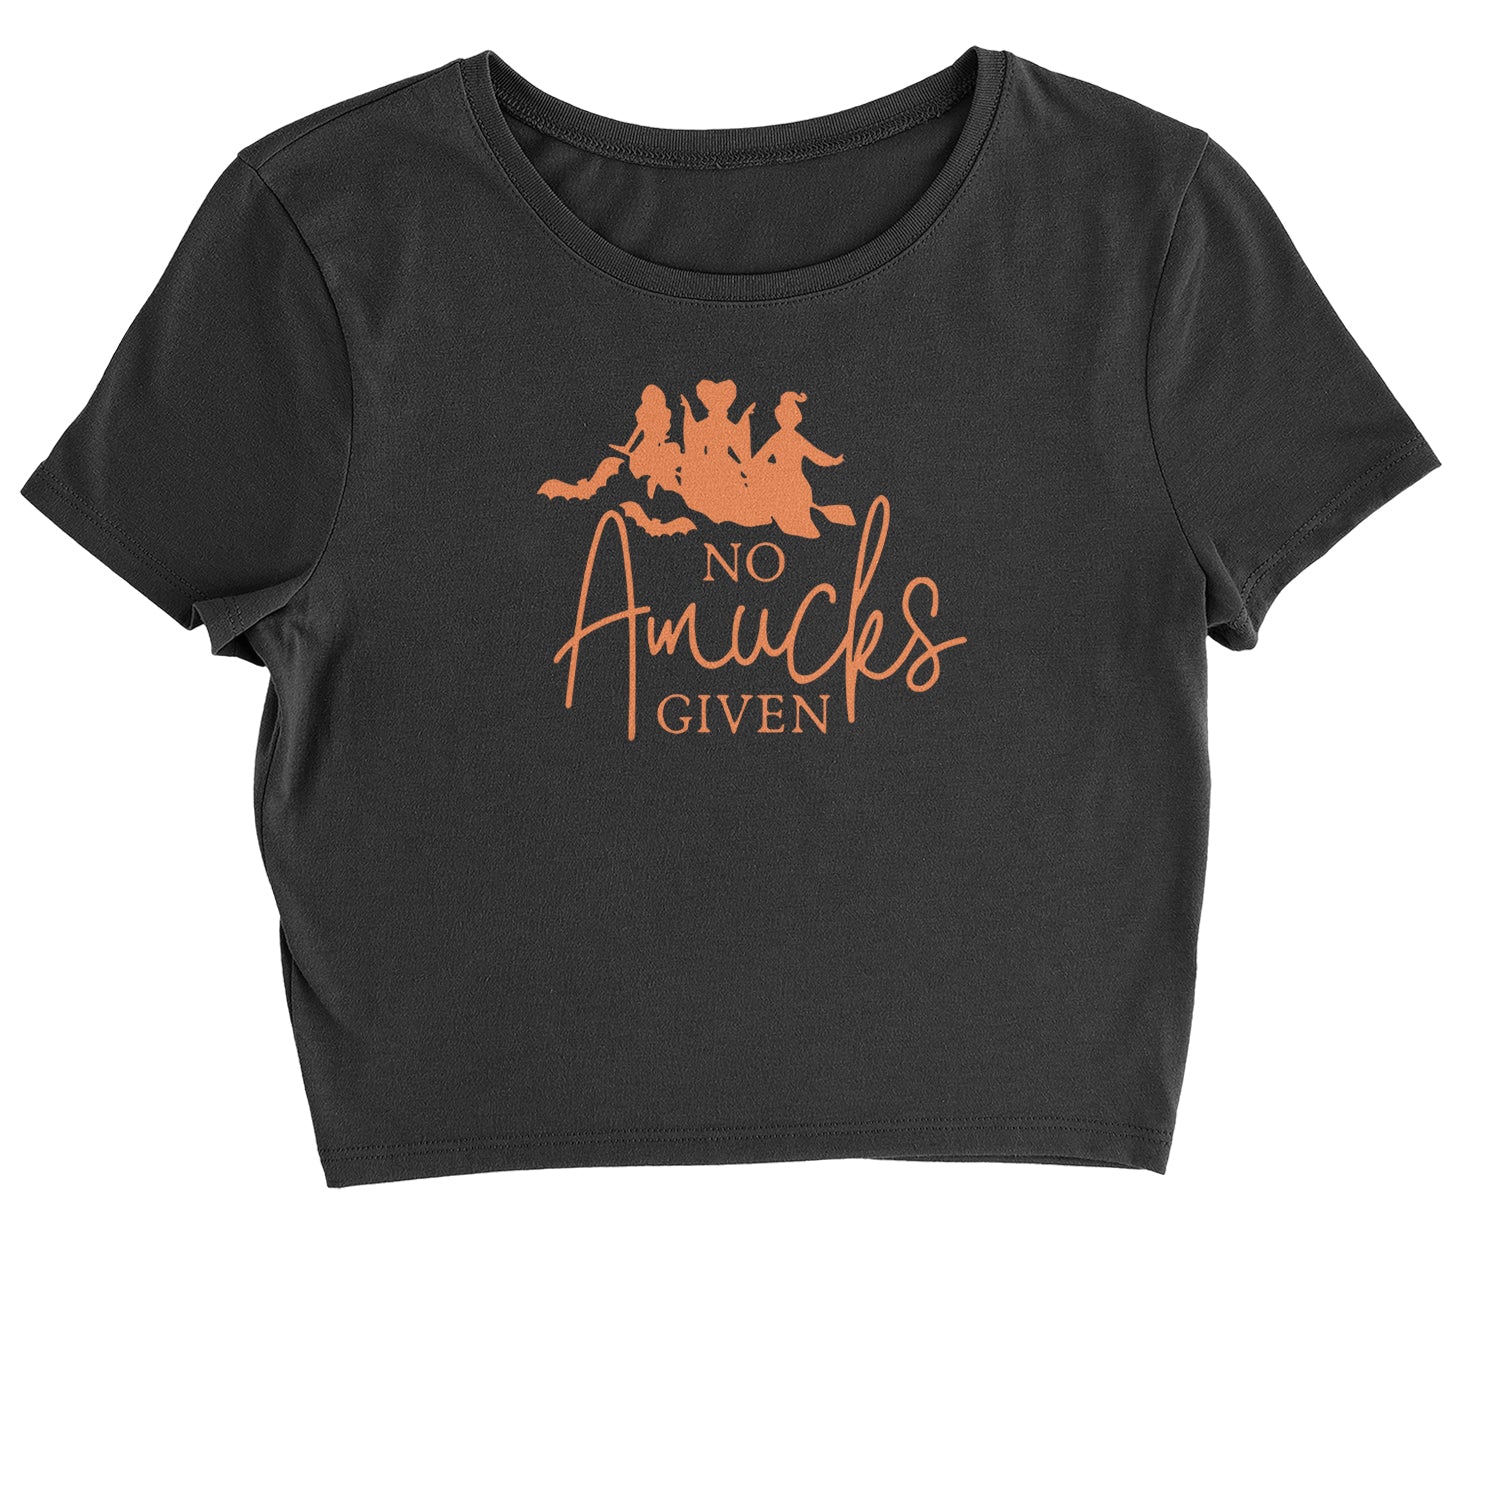 No Amucks Given Hocus Pocus Cropped T-Shirt descendants, enchanted, eve, hallows, hocus, or, pocus, sanderson, sisters, treat, trick, witches by Expression Tees